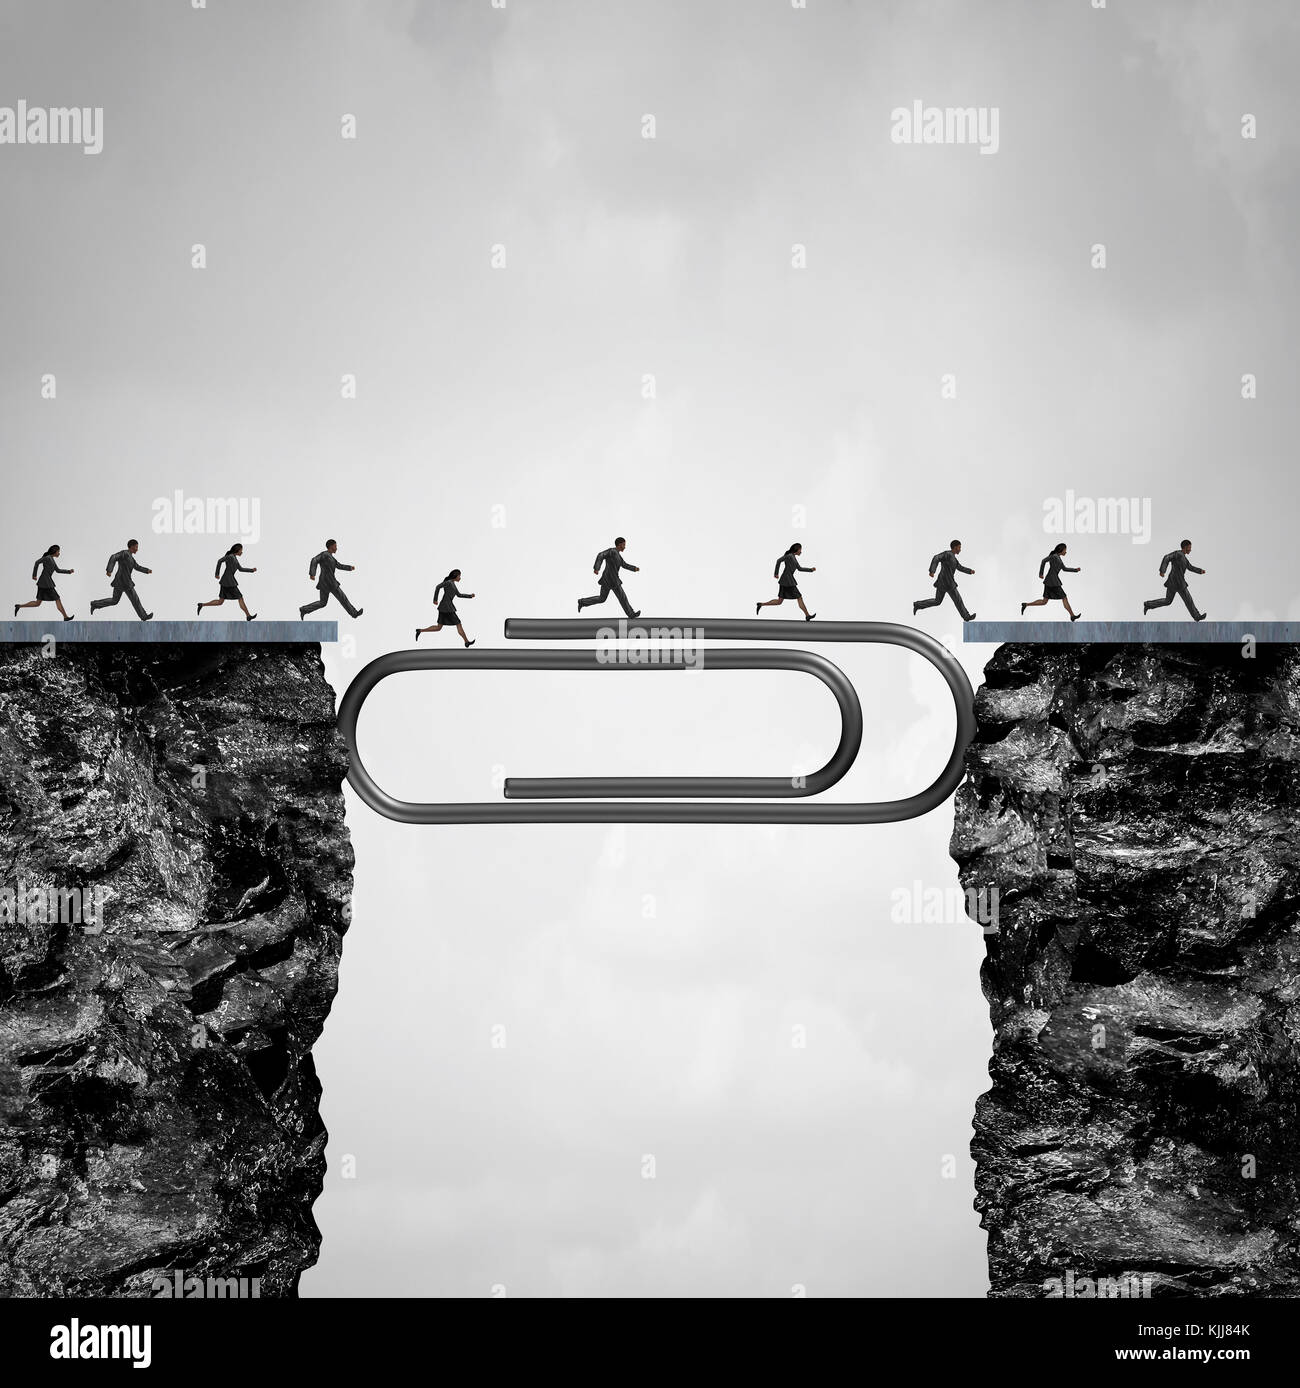 Office solution concept as people crossing a bridge created by a giant paper clip or paperclip as a business worker success metaphor. Stock Photo